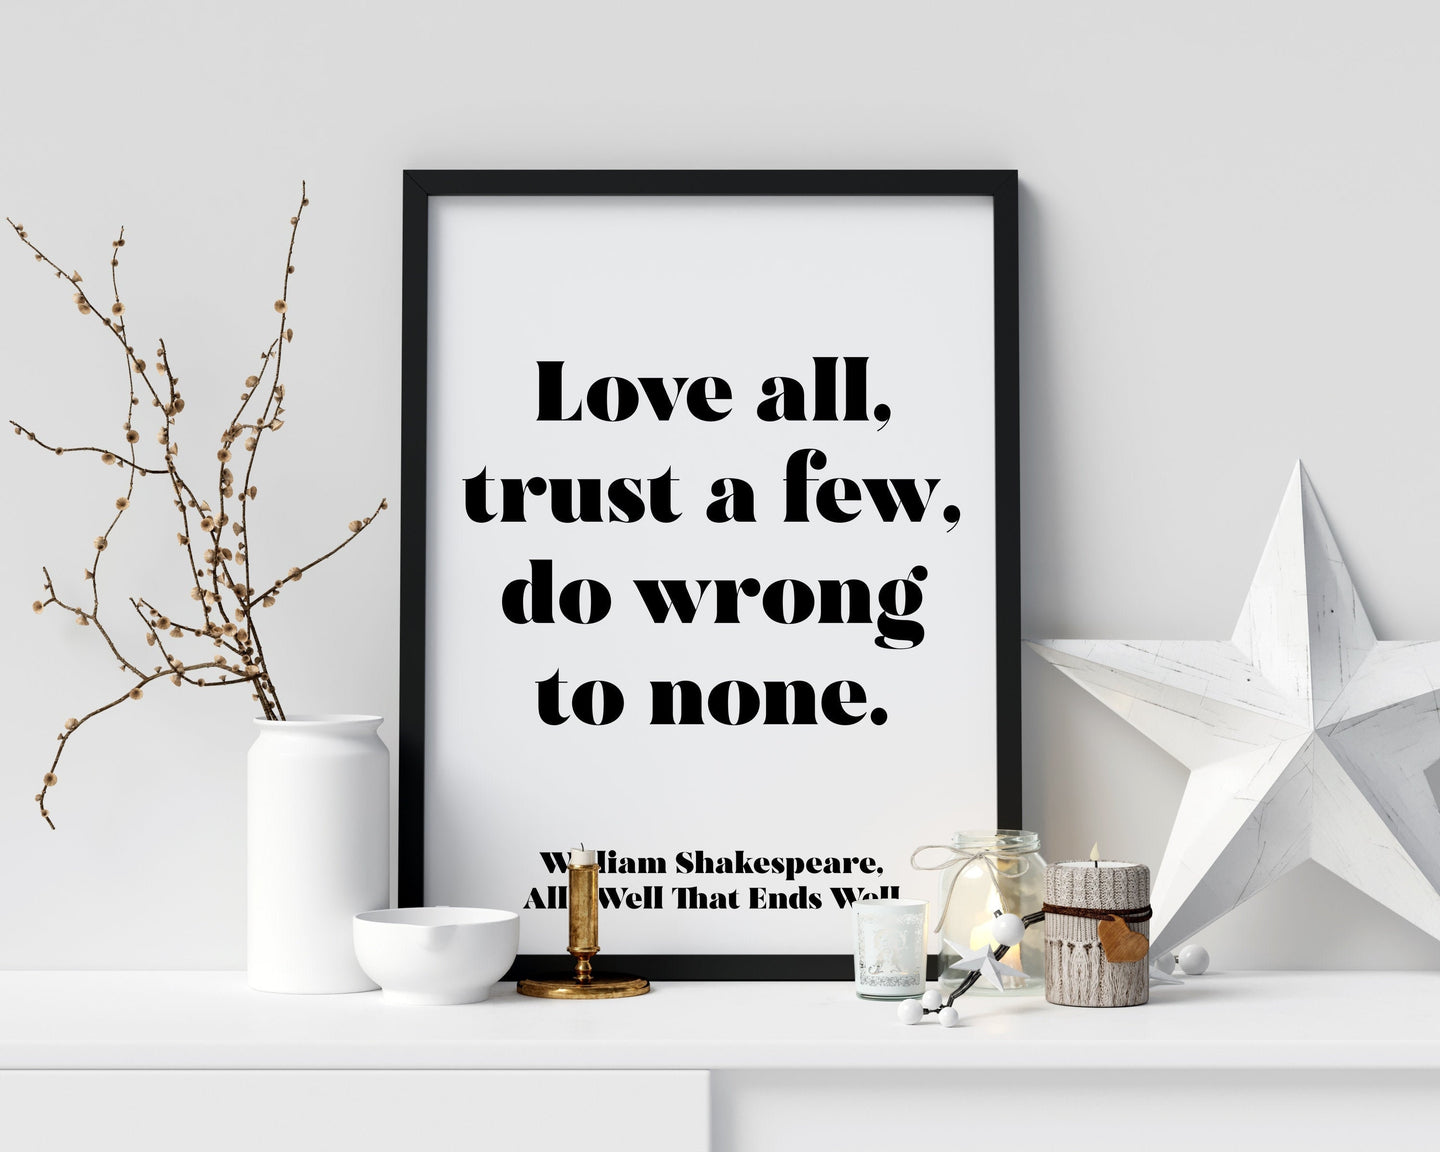 Shakespeare Quote - Love all, Trust a few, do wrong to none - All's well that ends well - book lover Print - Unframed print